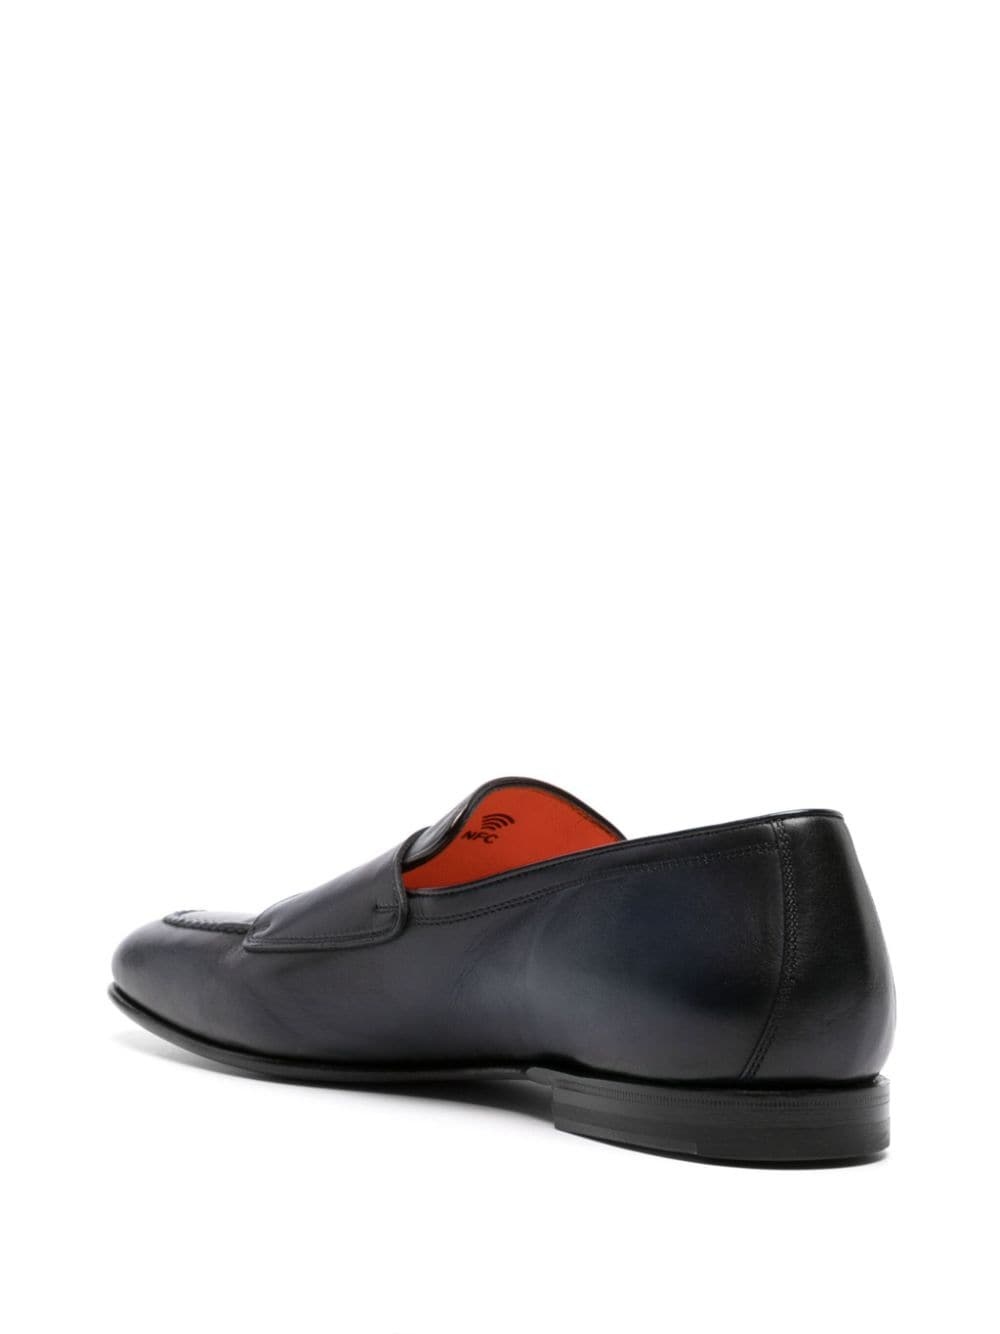 double-buckle leather monk shoes - 3